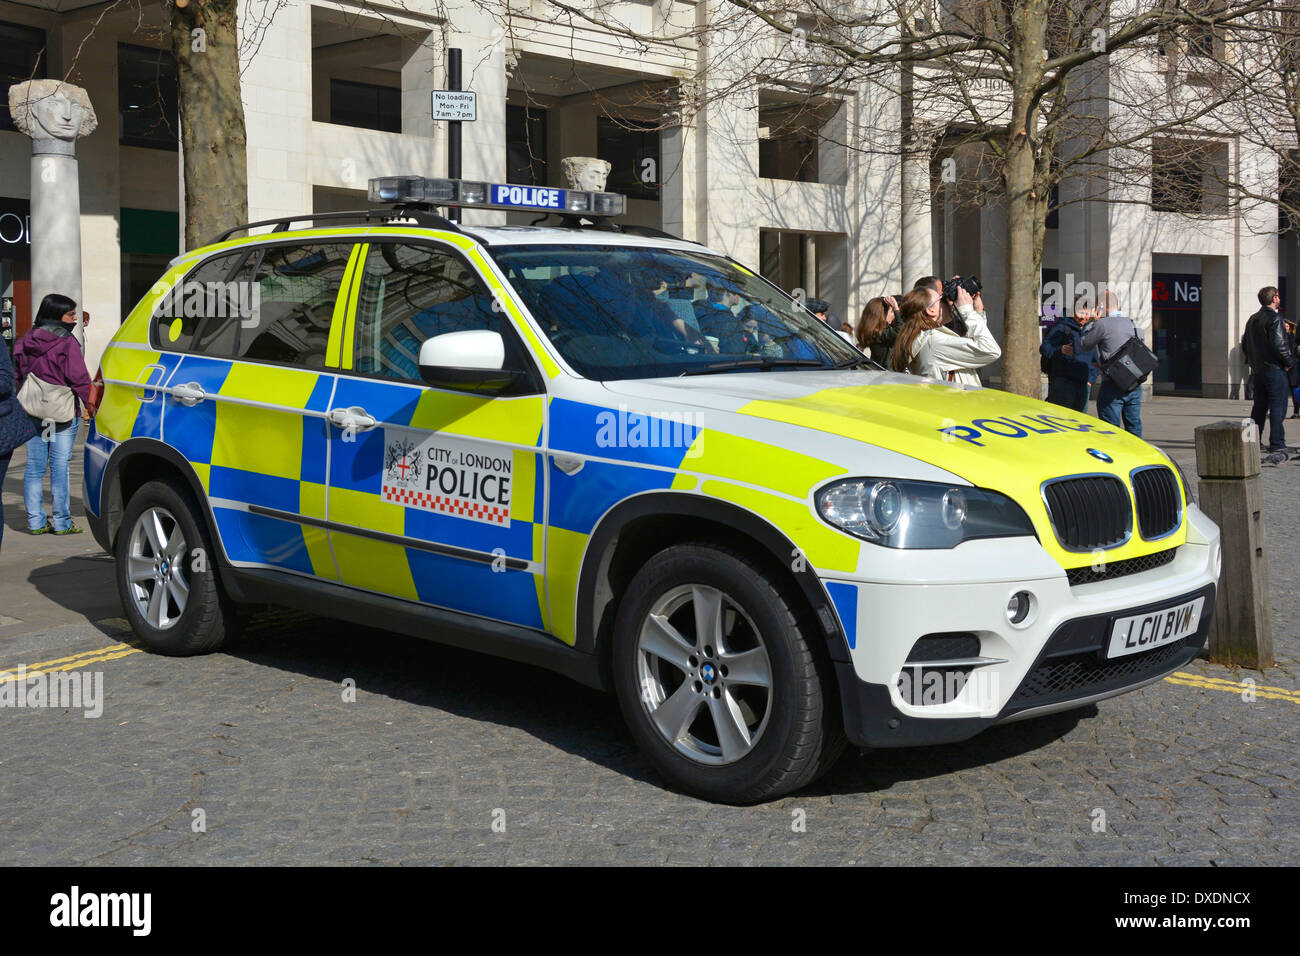 City of London Police BMW patrol car with Battenberg markings in tourist hot spot outside St Pauls cathedral England UK Stock Photo